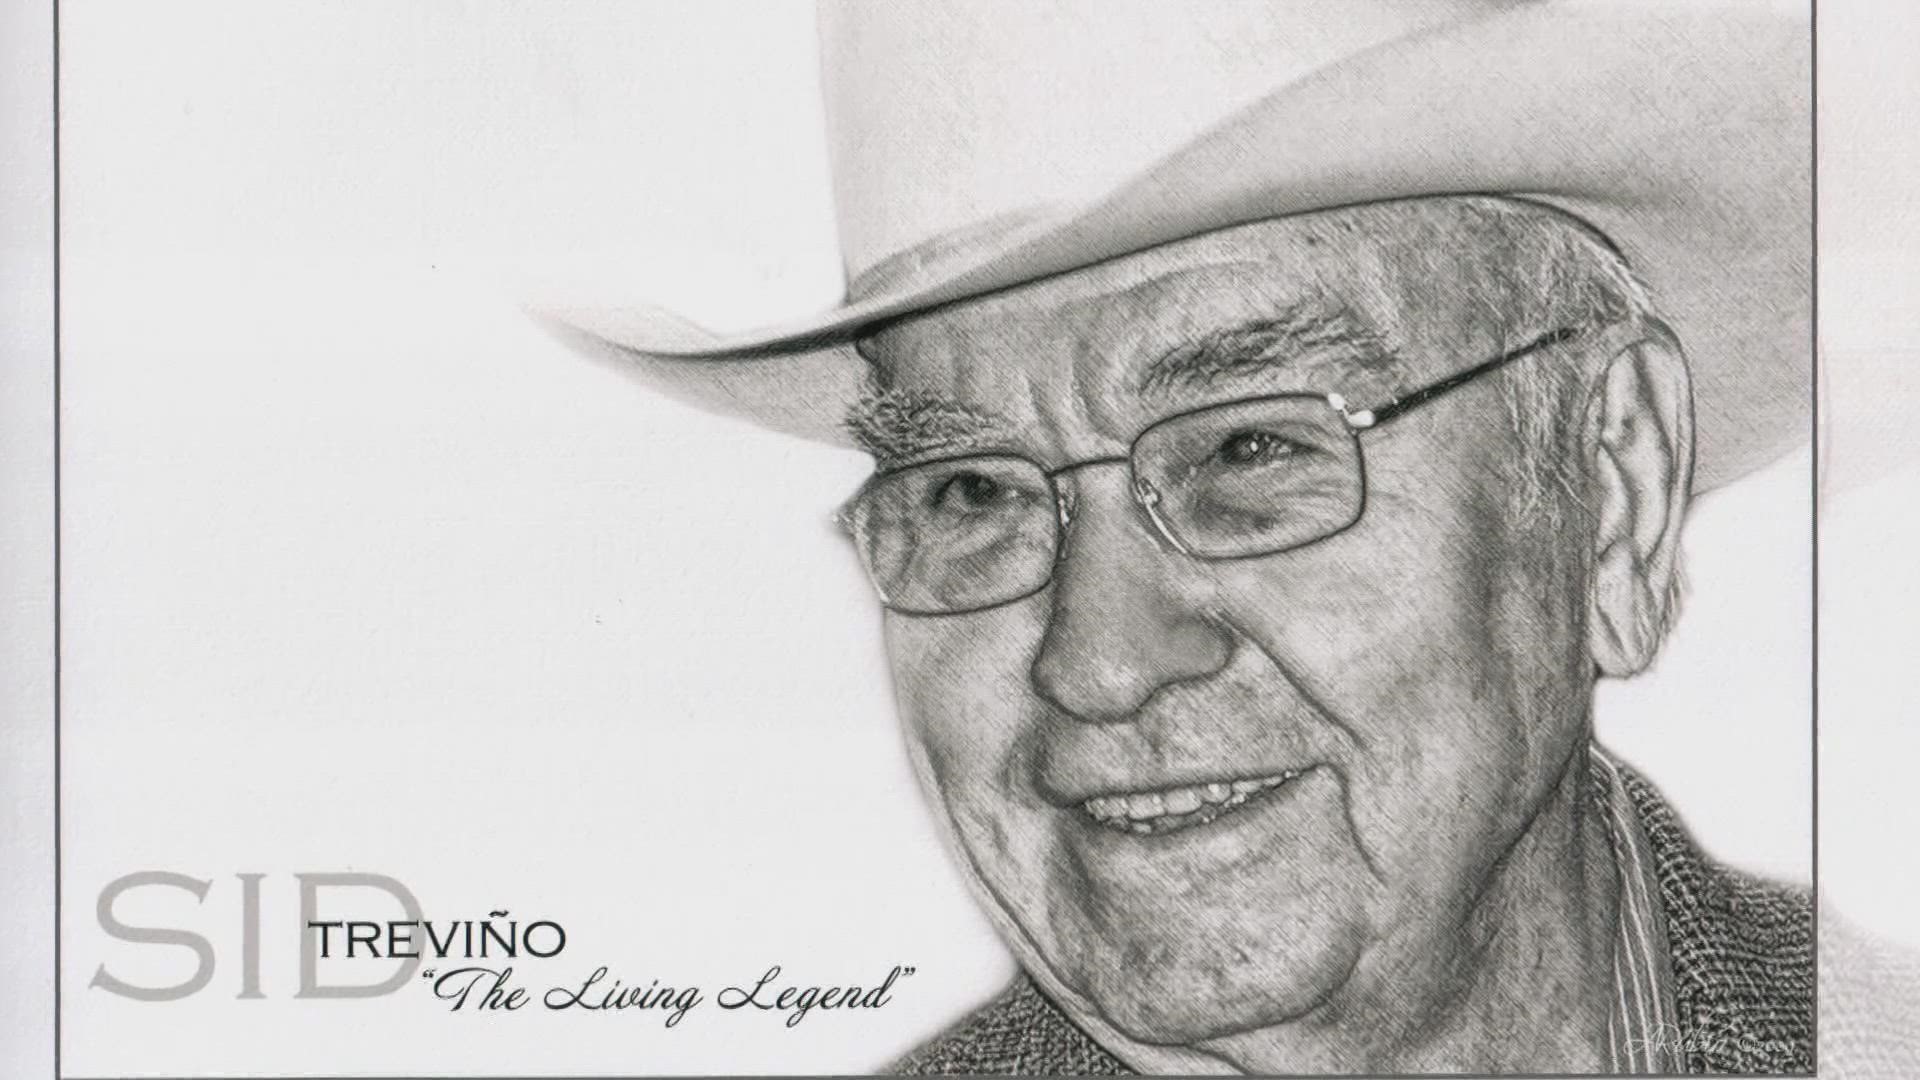 Trevino has been a soldier, a police officer, a restaurant owner and more over his 93 years.